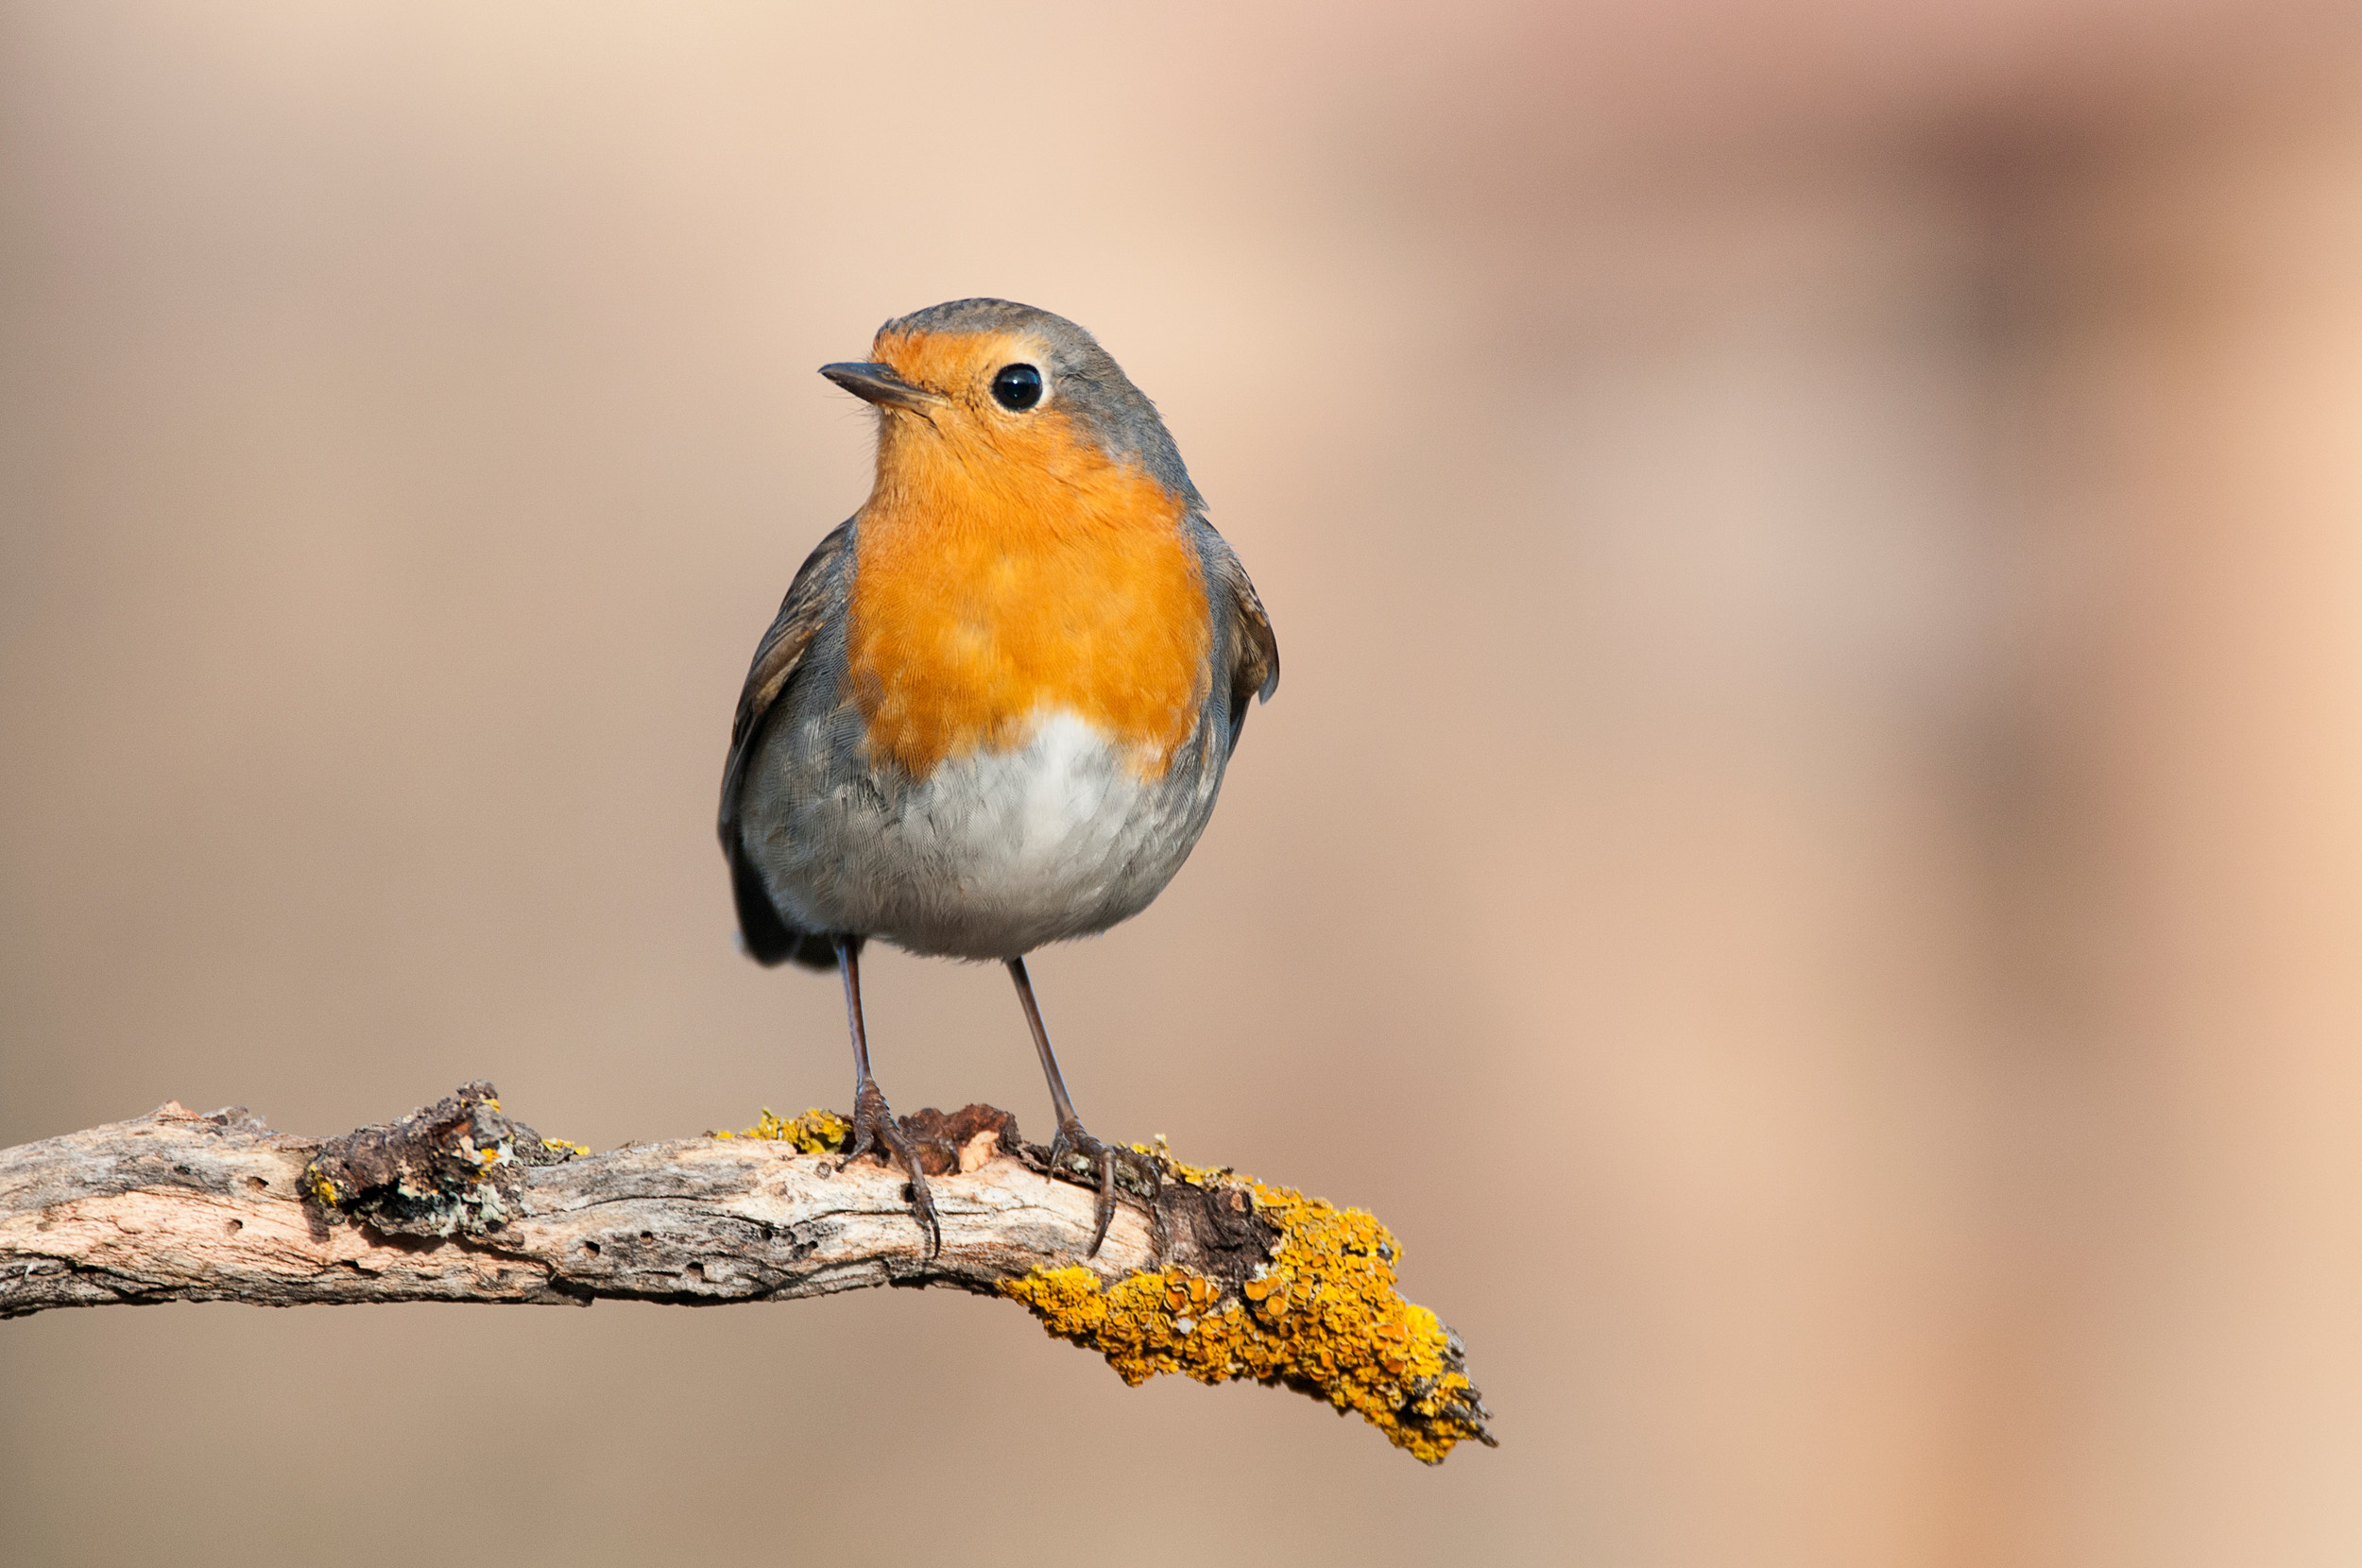 A Robin stood on a lichen covered branch.